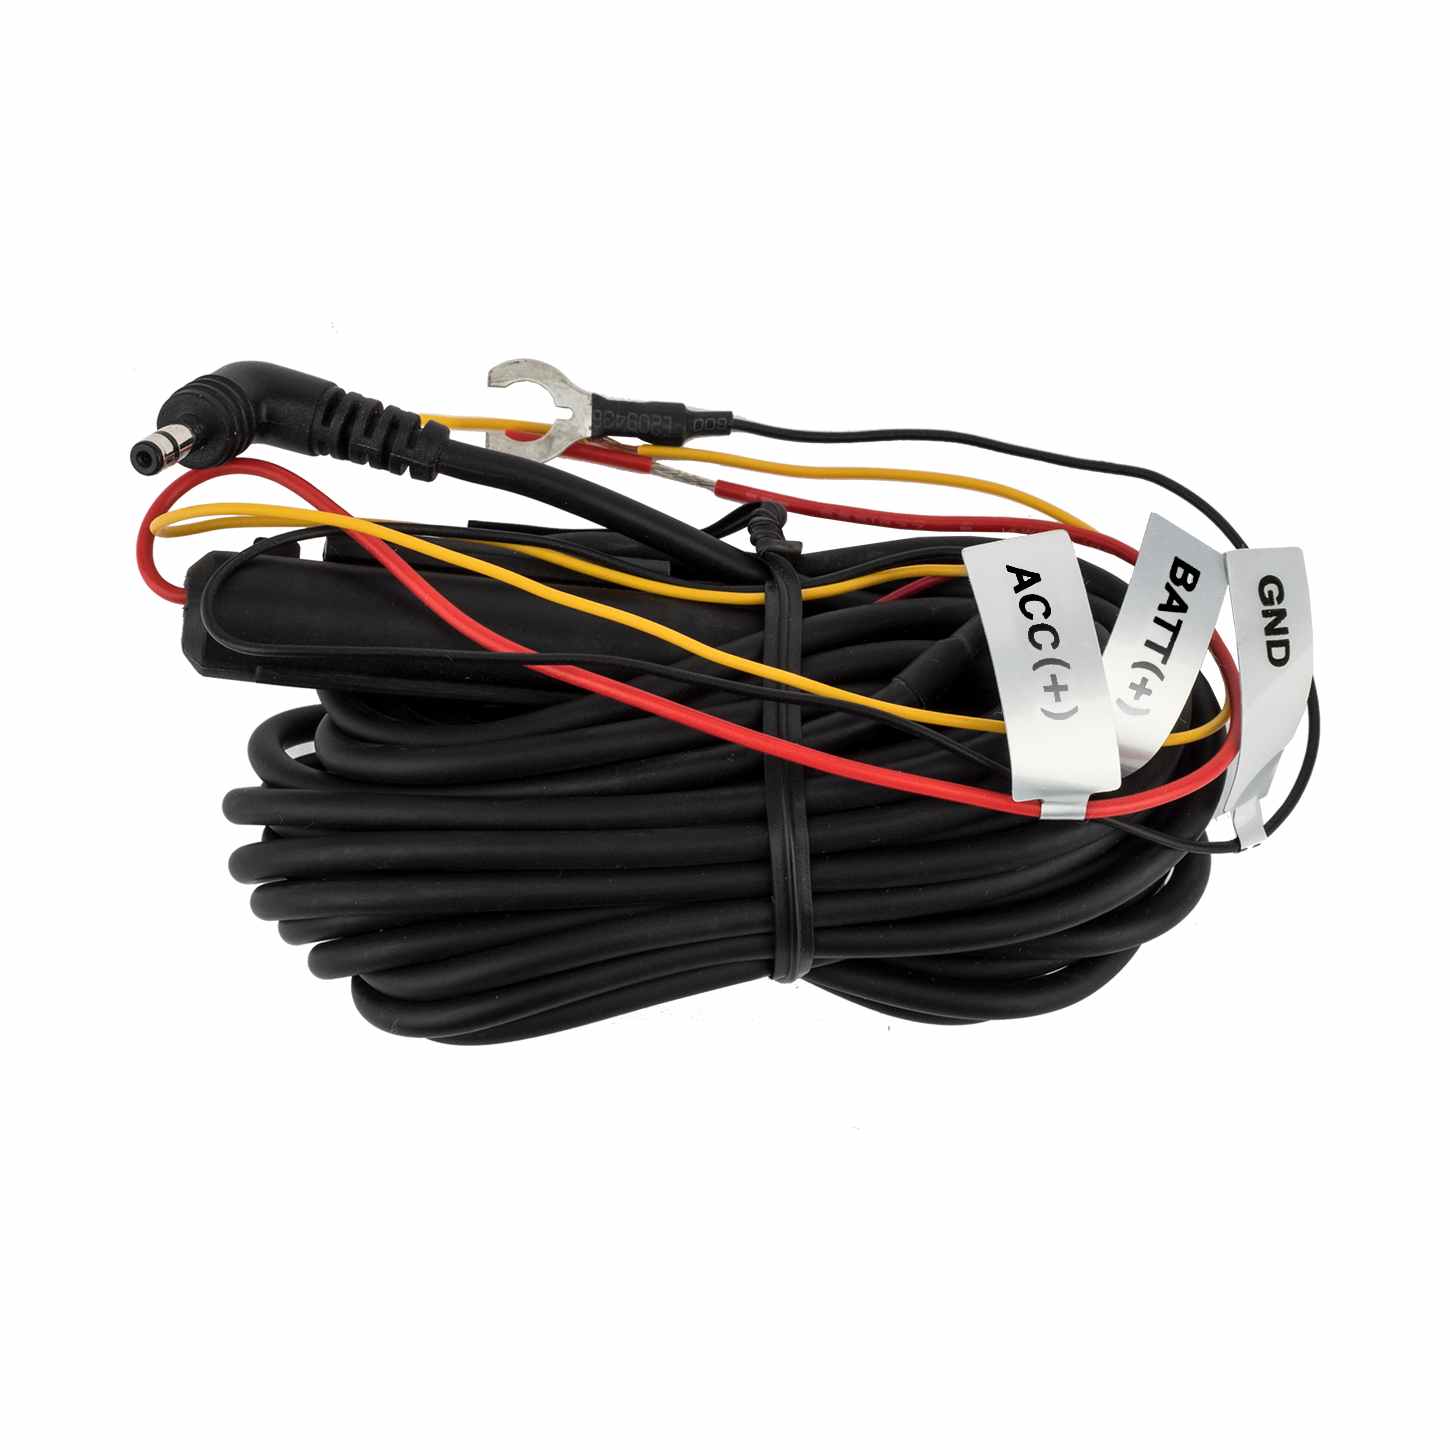 Hardwiring Cable for Blackvue DR900X/DR750X/DR590X models (CH-3P1)